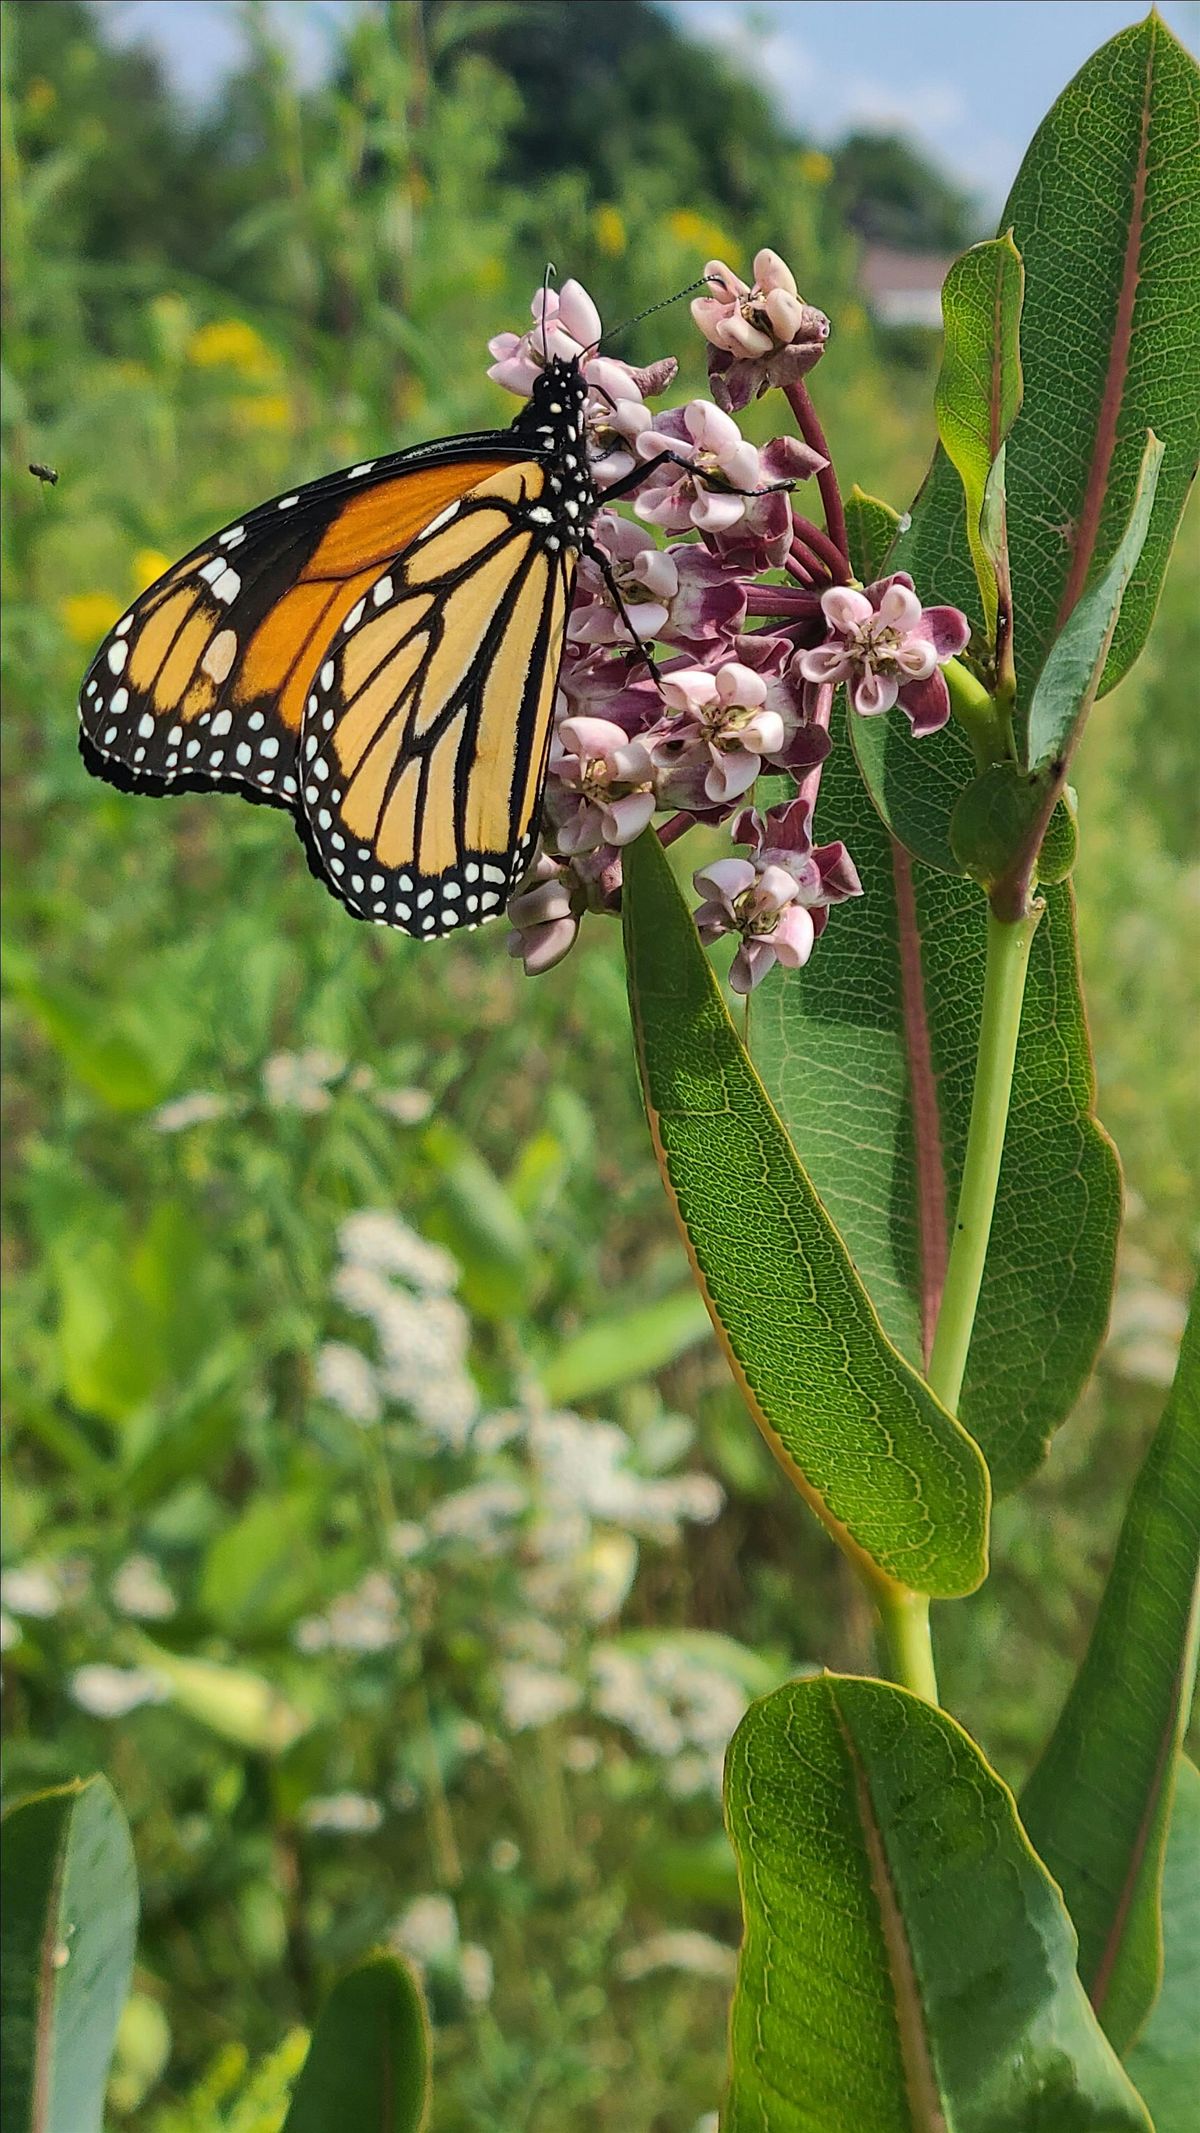 From Milkweed to Monarchs Learning Program